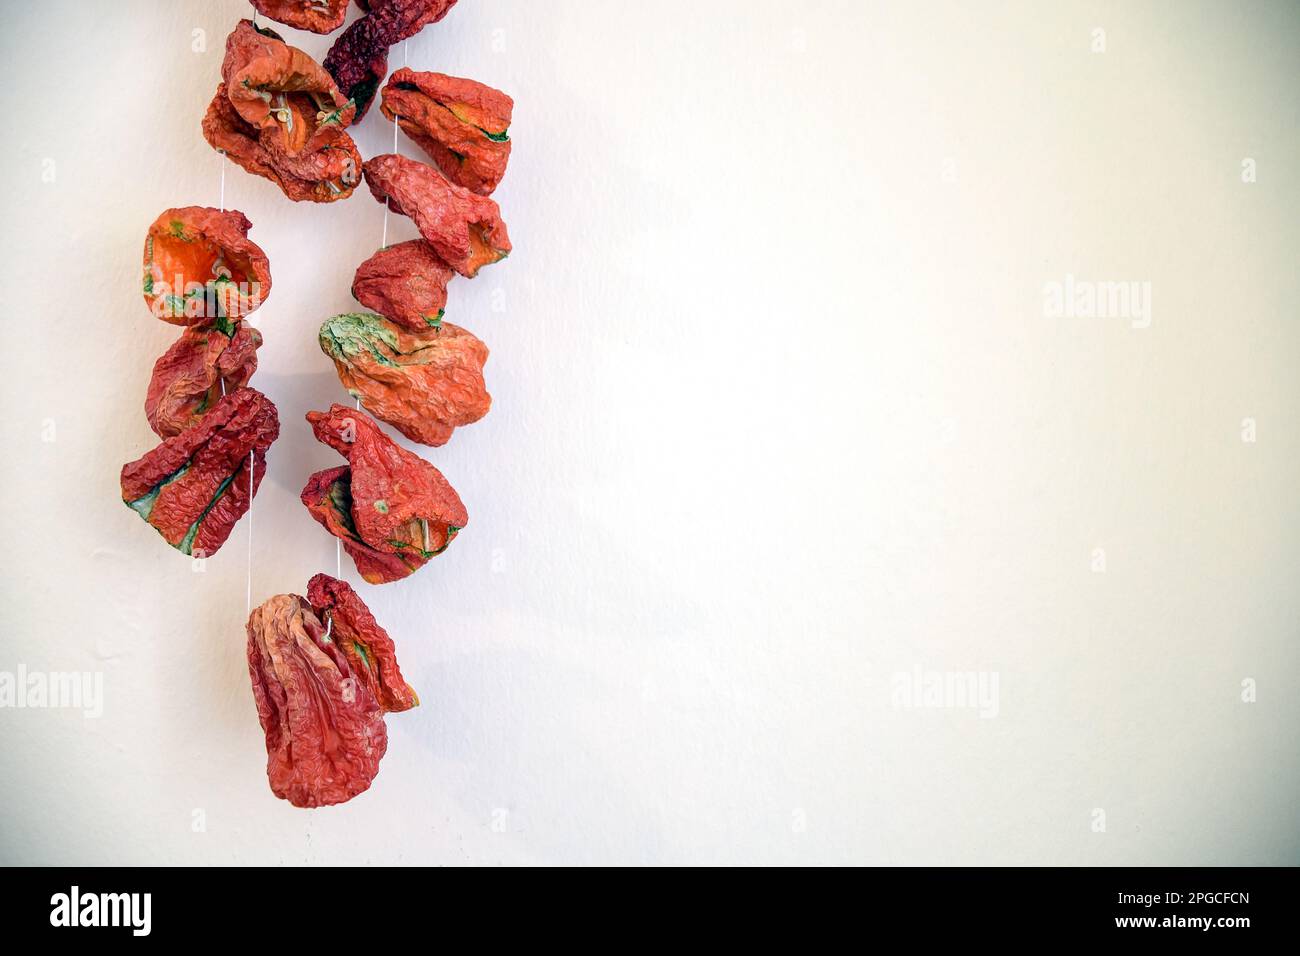 Dried green and red bell pepper hanged on the wall Stock Photo